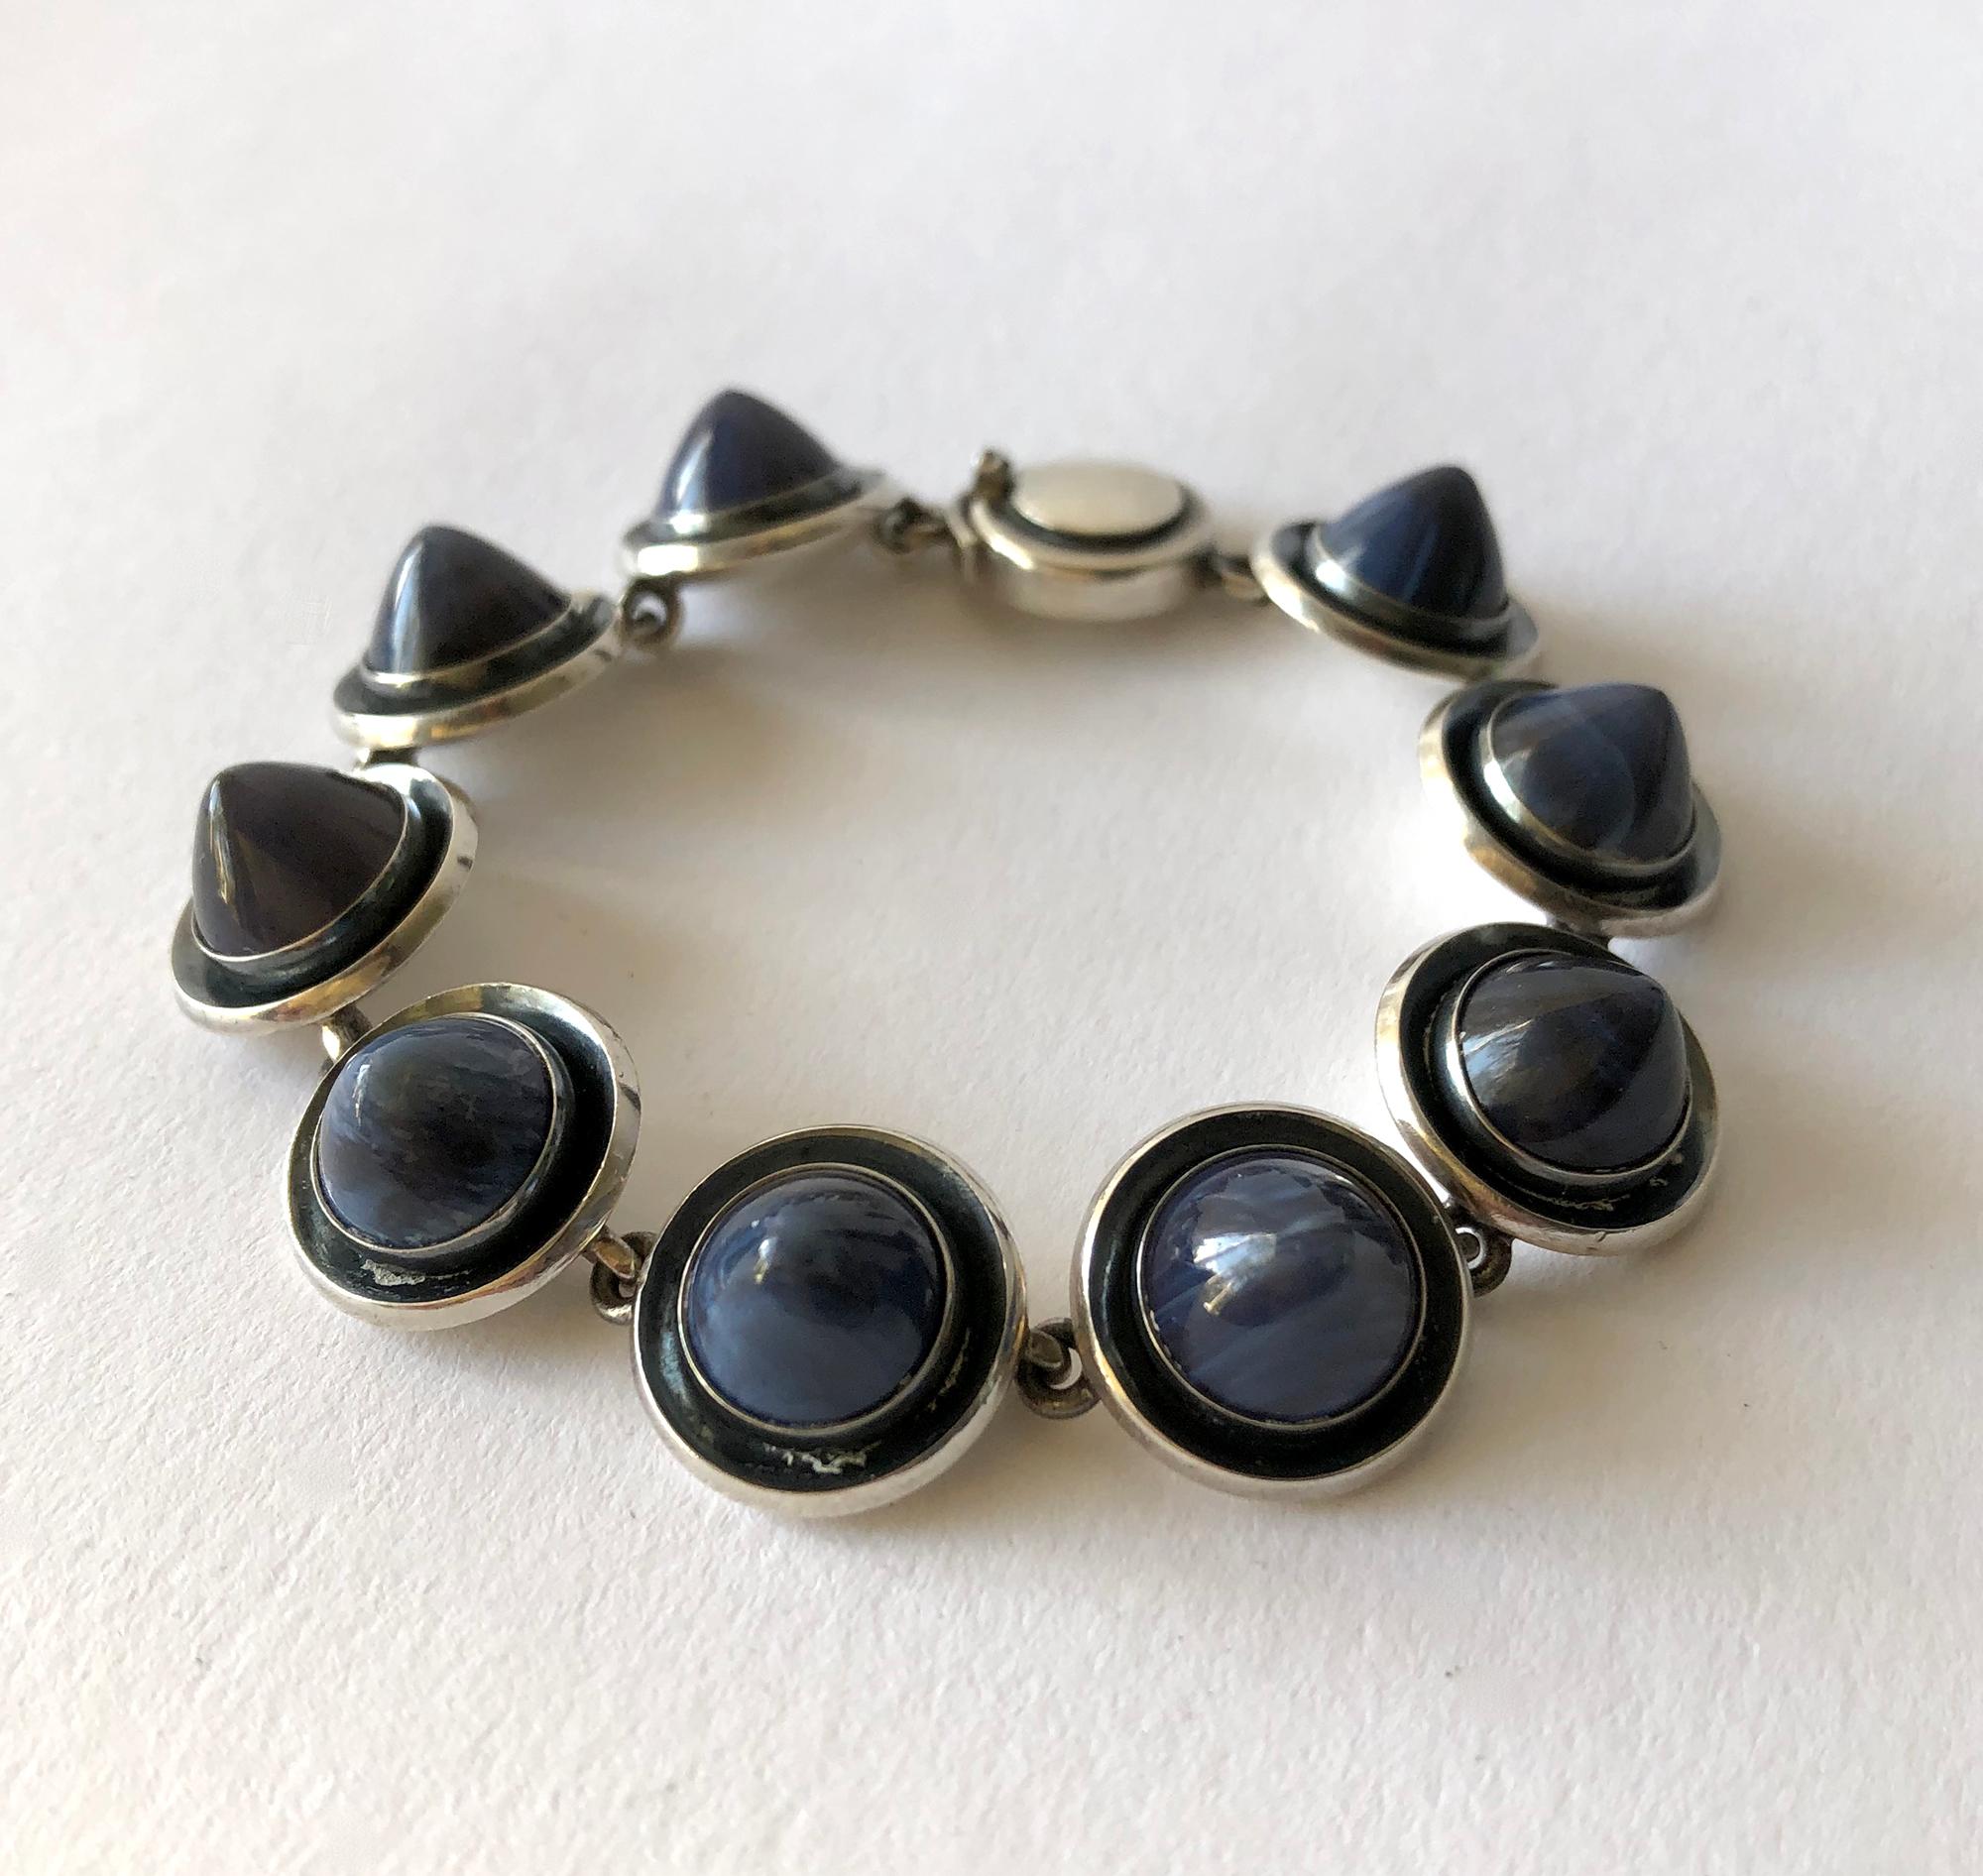 Danish modern sterling silver linked bracelet with conical shaped striped blue agate stones created by Niels Erik From, circa 1960's.  Bracelet measures 7 1/4